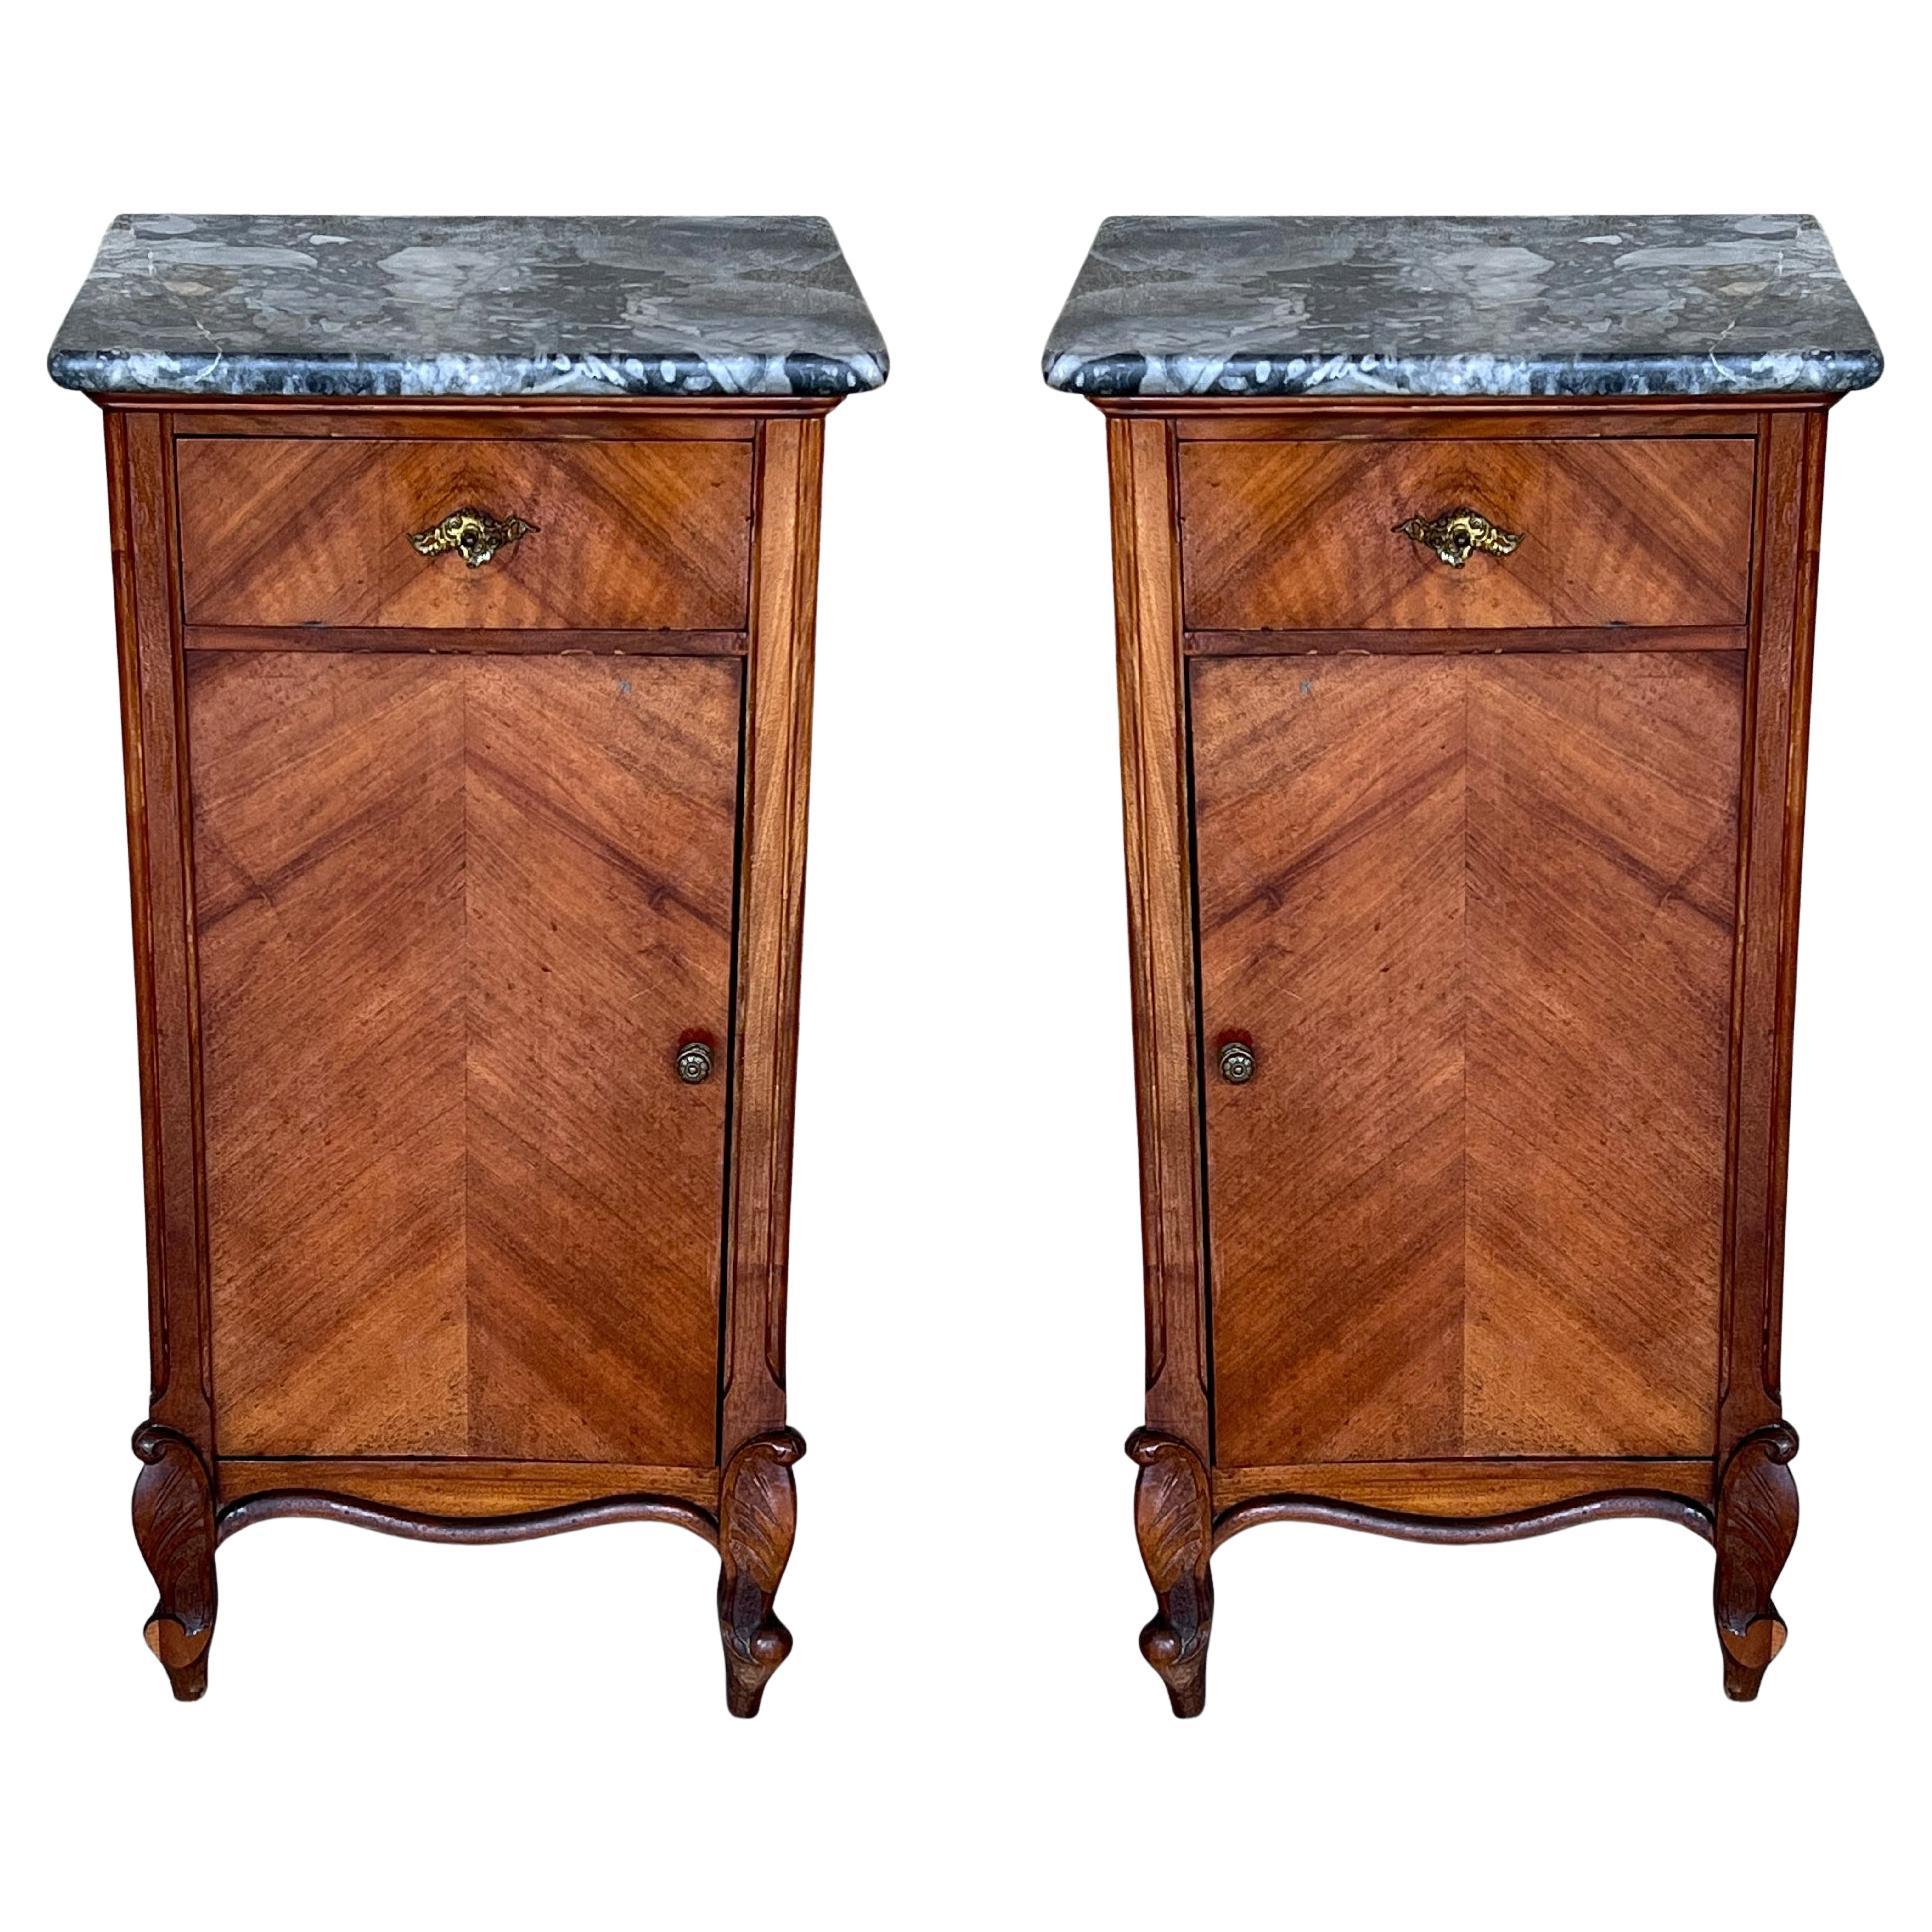 1900s, Art Nouveau Pair of Walnut Nightstands with Crest and Marble Top